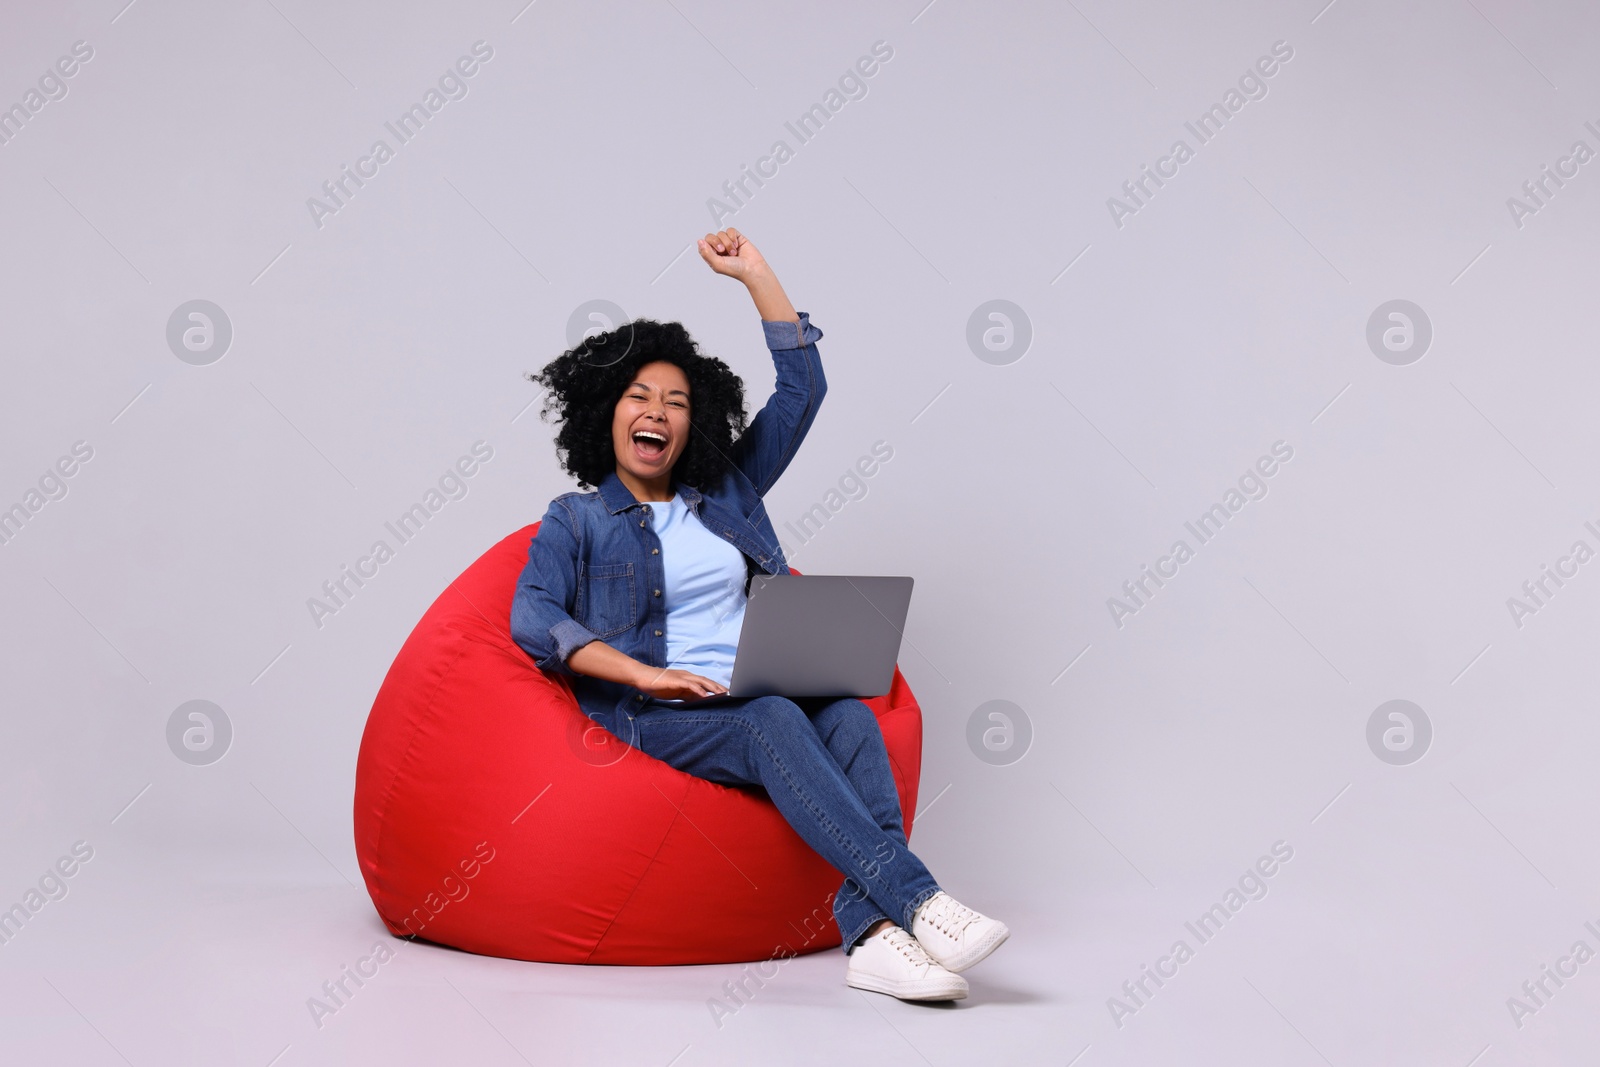 Photo of Emotional young woman with laptop sitting on beanbag chair against light grey background